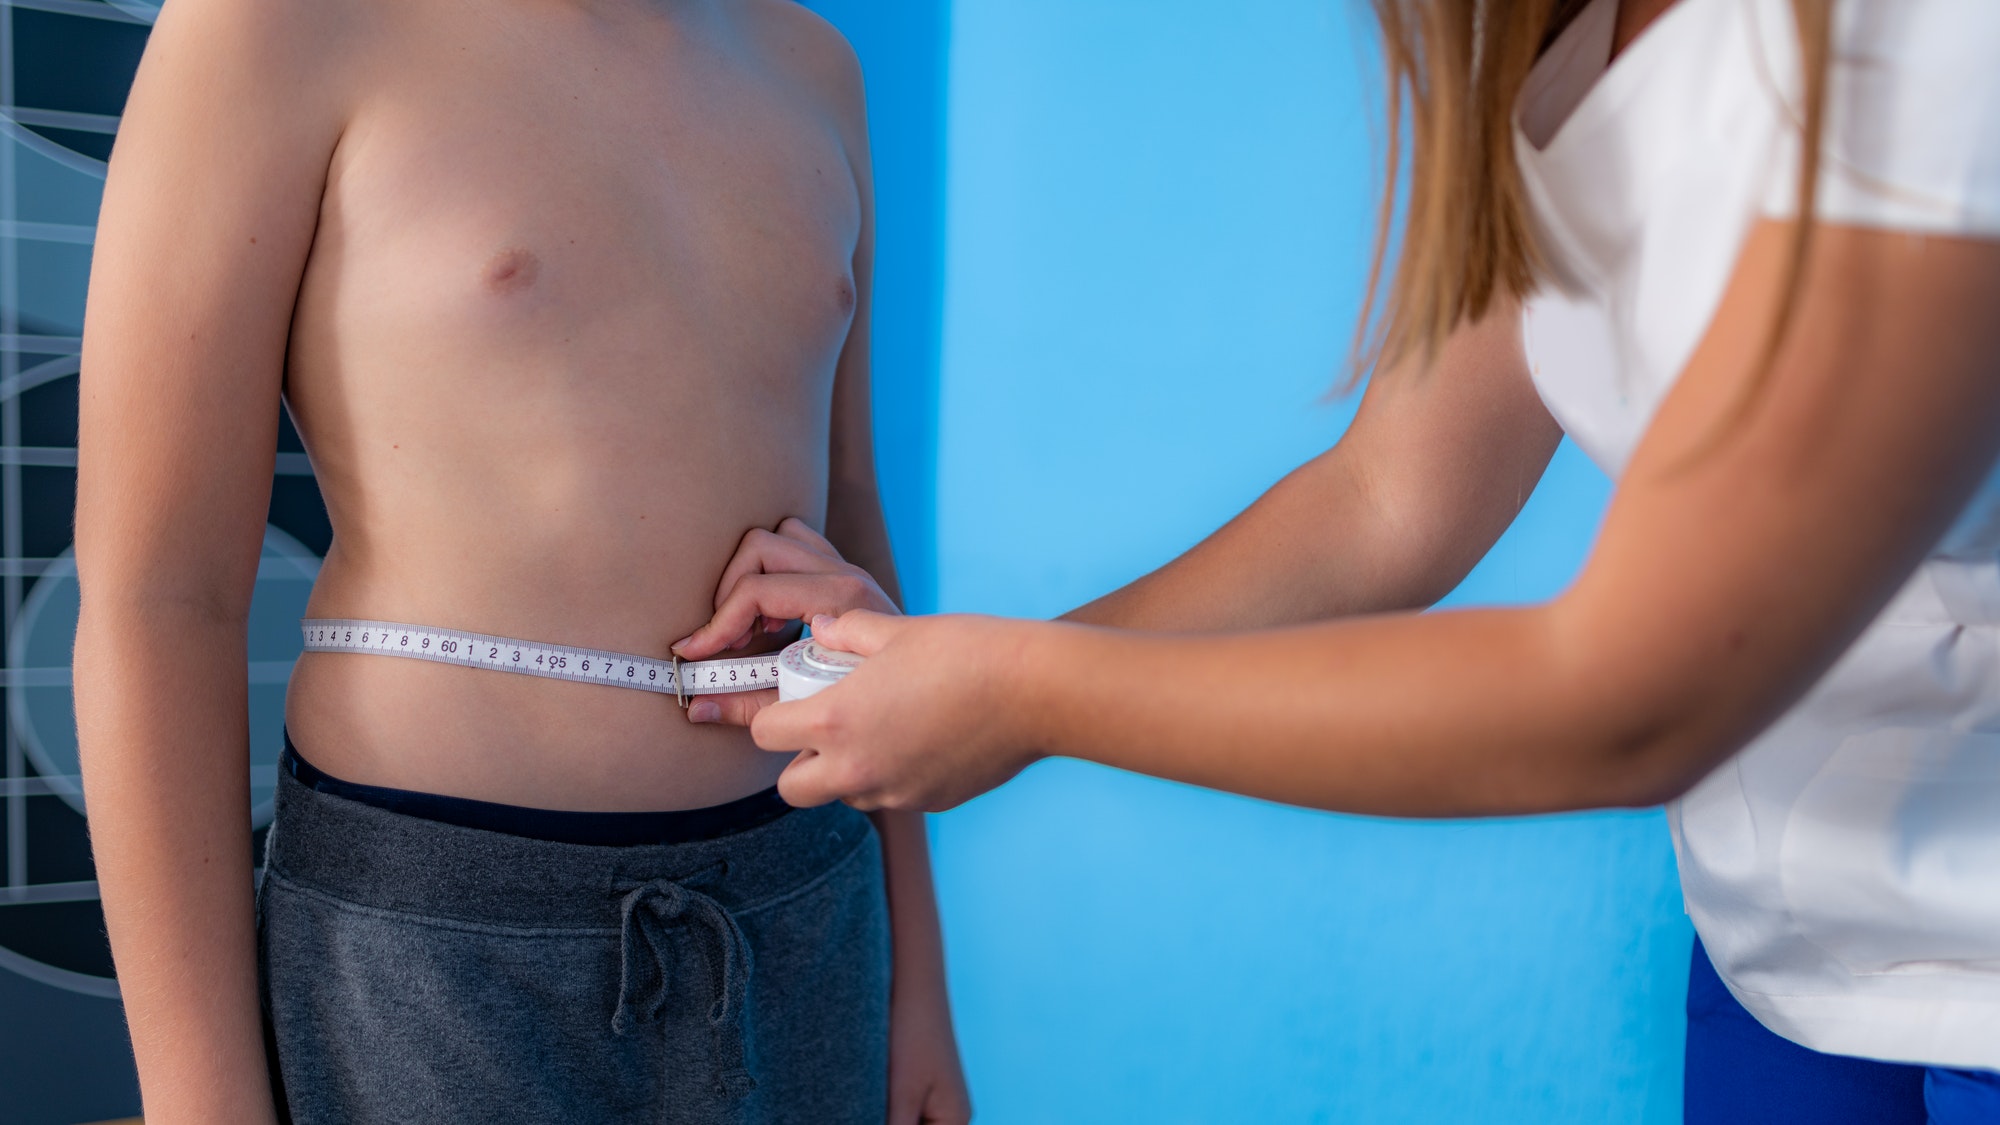 Body fat analysis of children, anthropometric belly circumference tape measurement